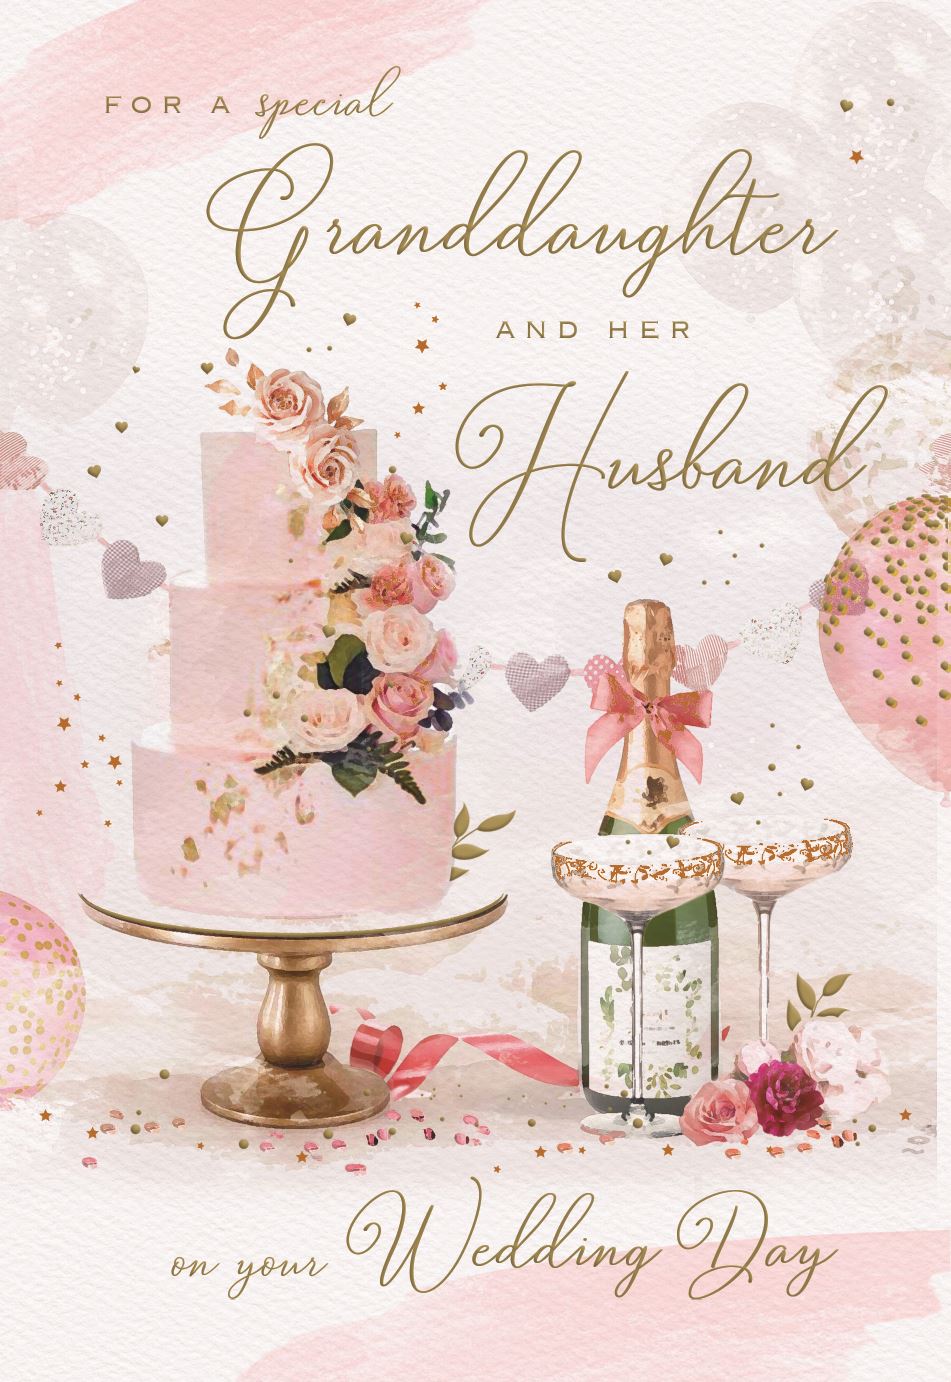 Granddaughter and Husband wedding day card